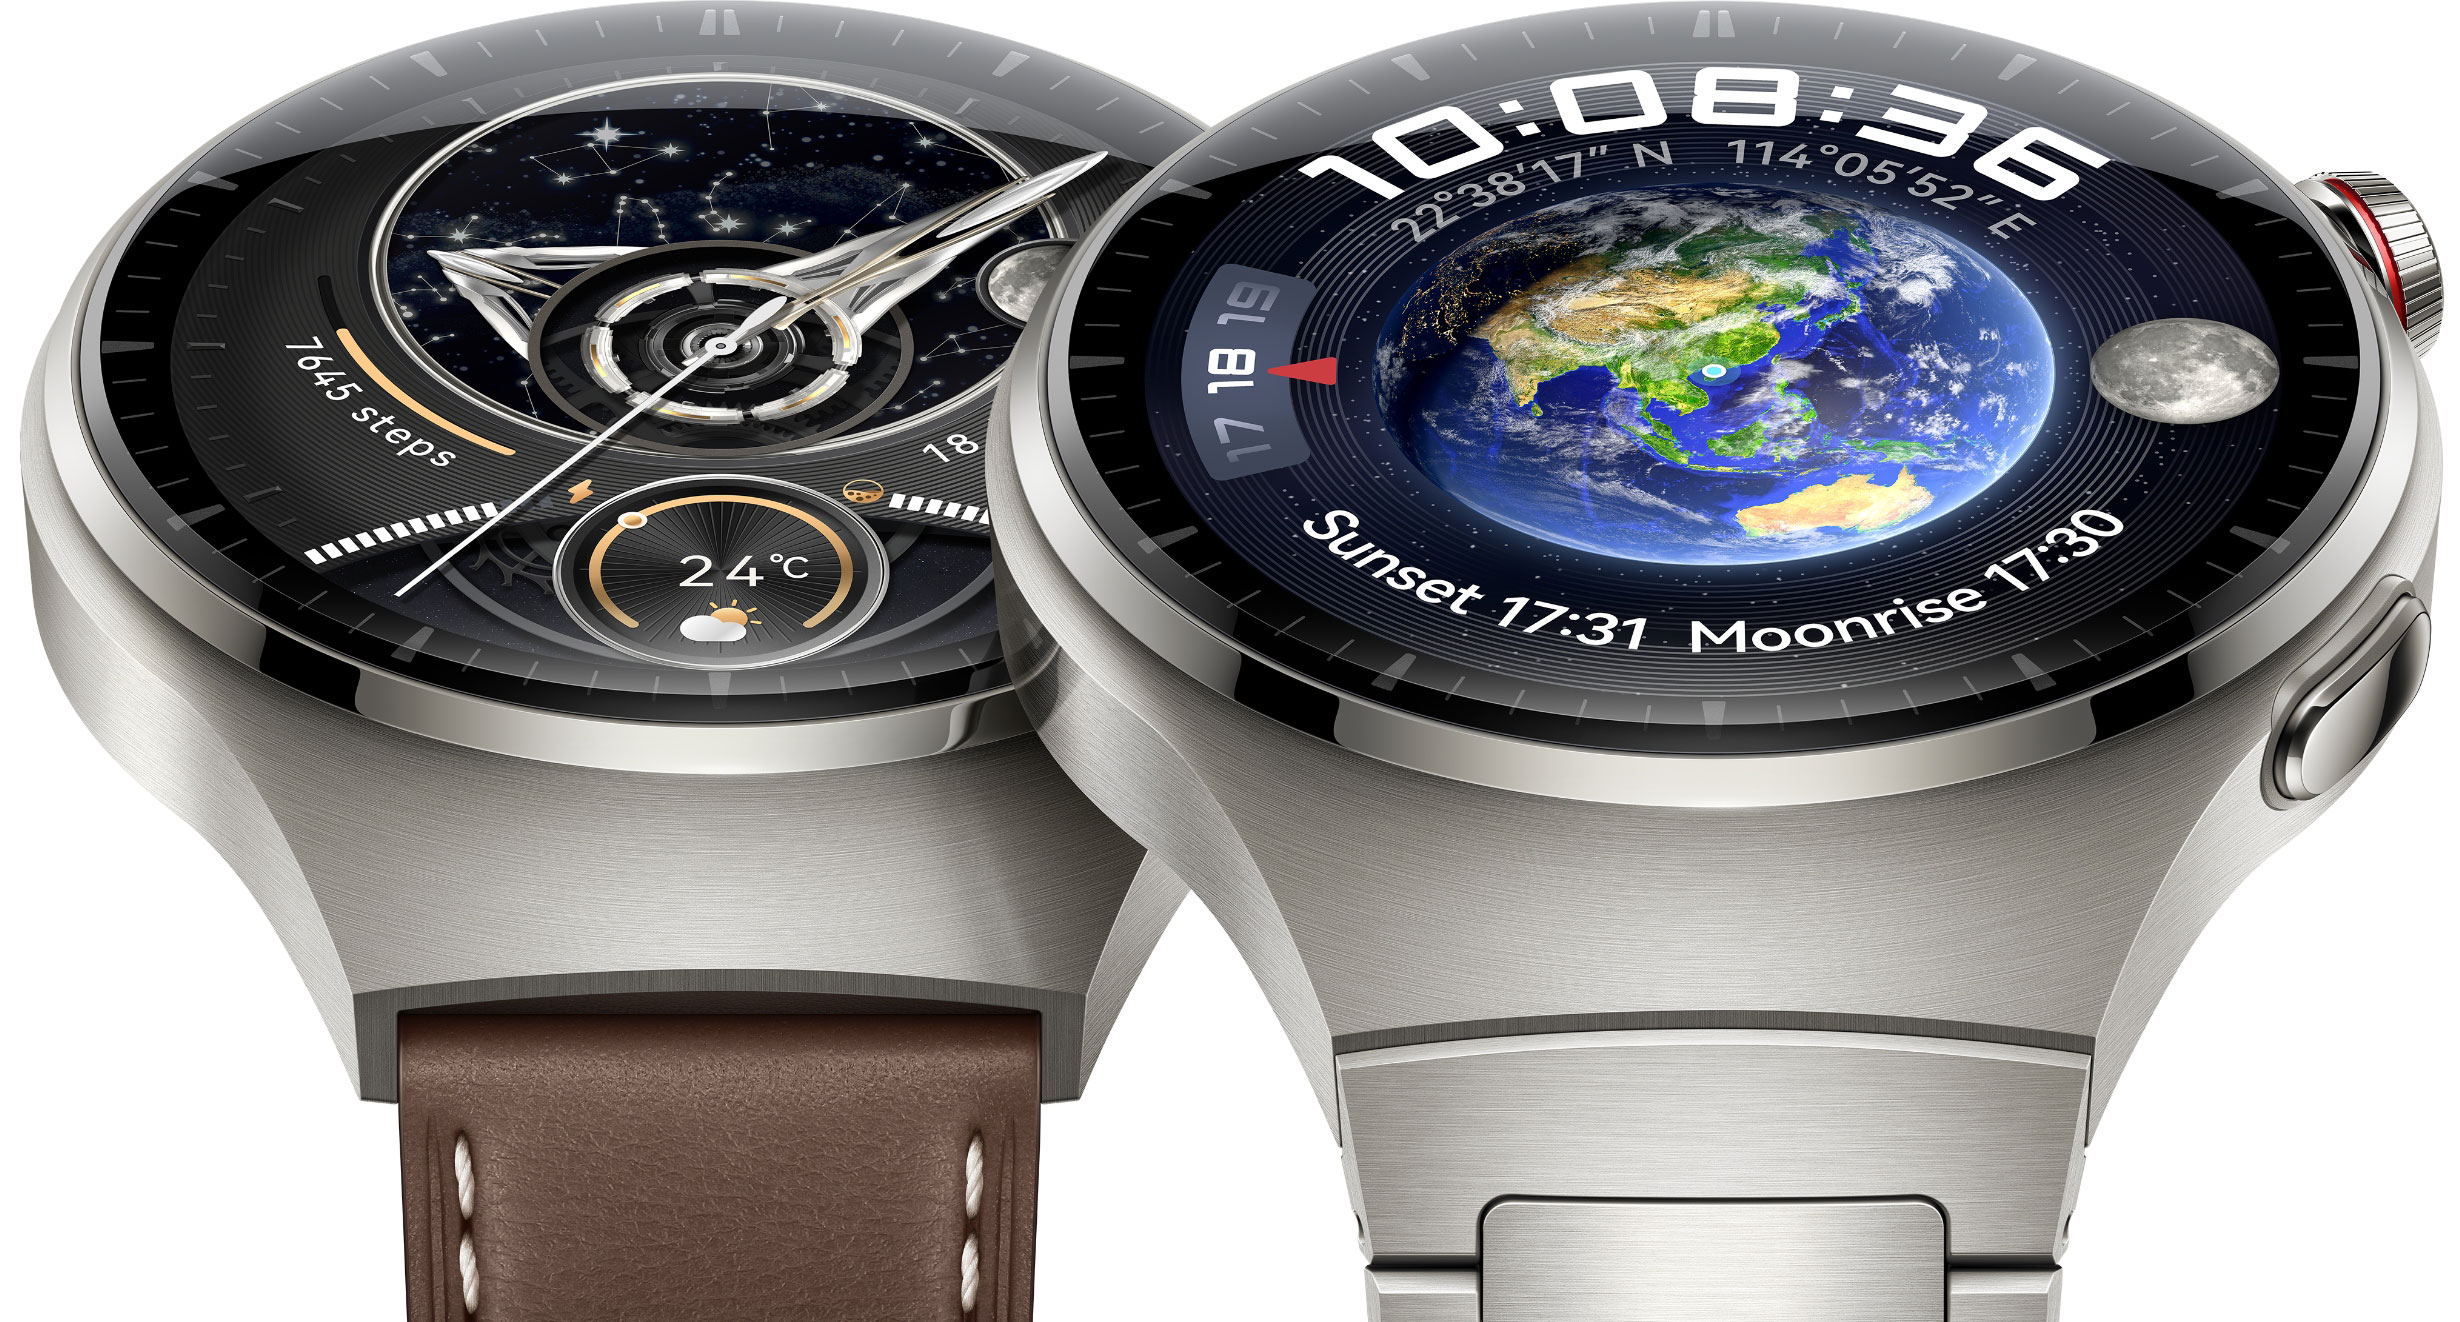 Huawei Watch 4 Pro vs Huawei Watch GT: What is the difference?